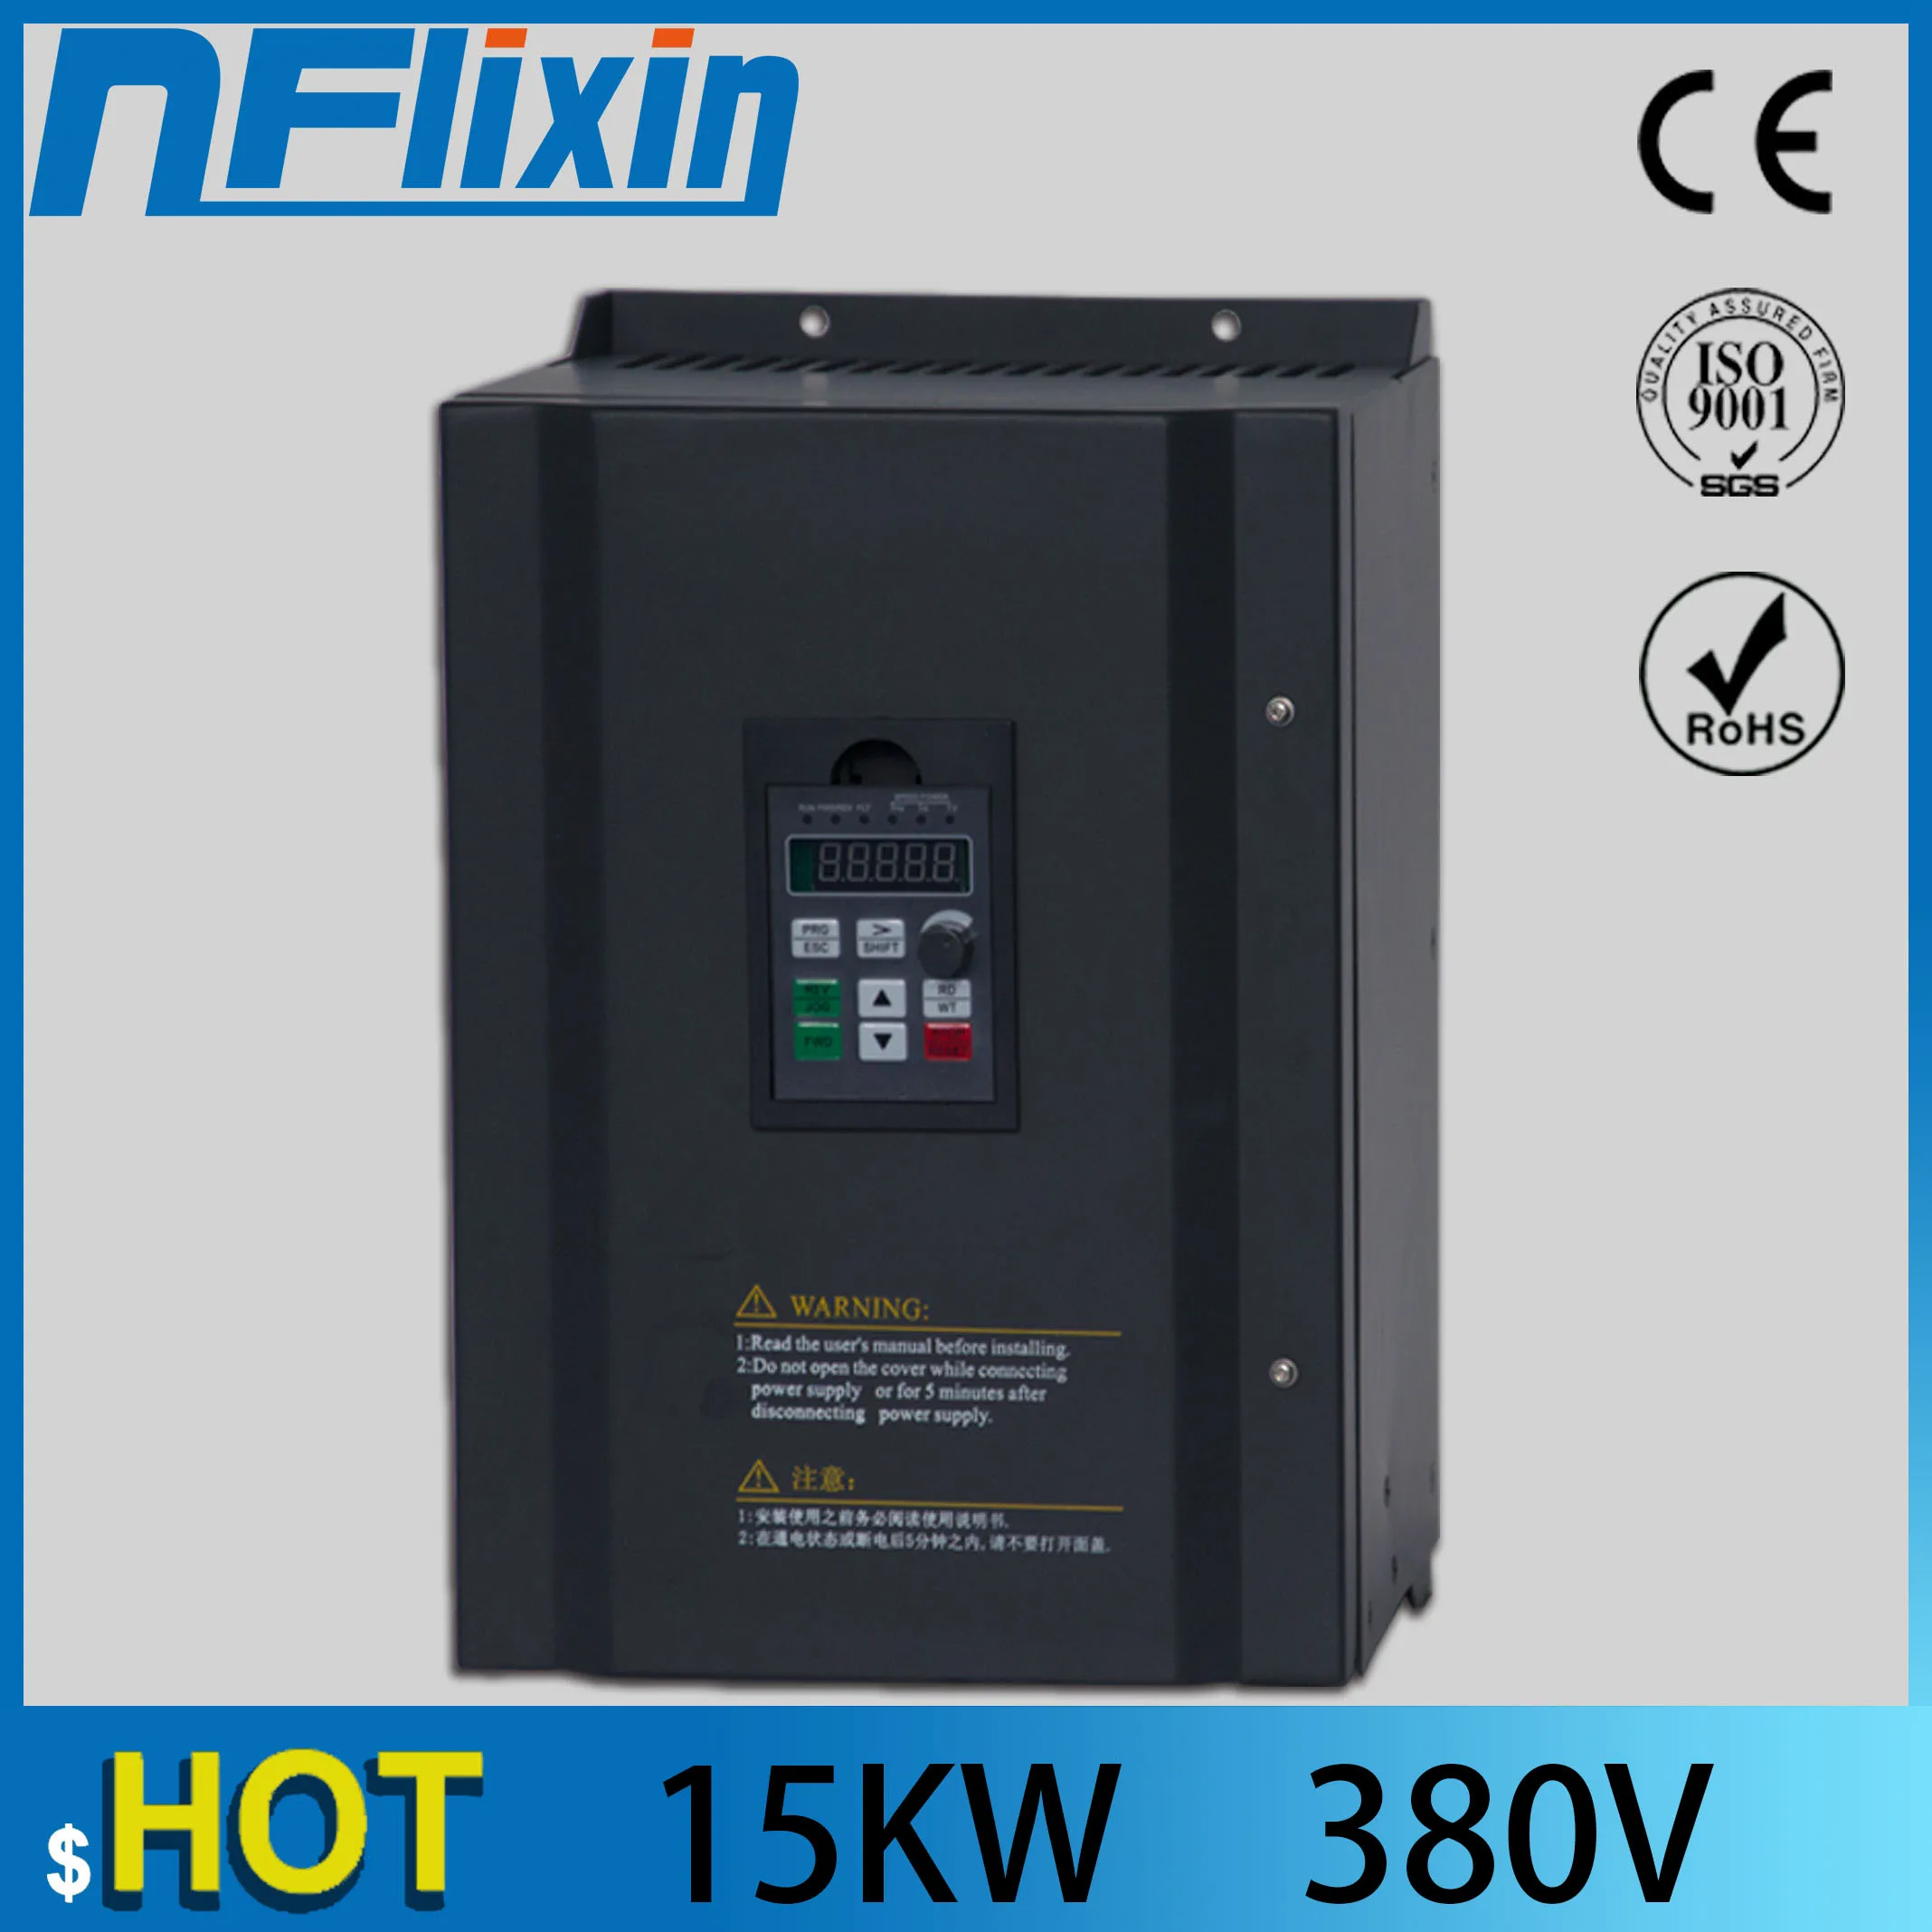 

15kw VFD Variable Frequency Driver 380V VFD Inverter 3HP Input 3HP Output CNC spindle motor Driver spindle motor speed control